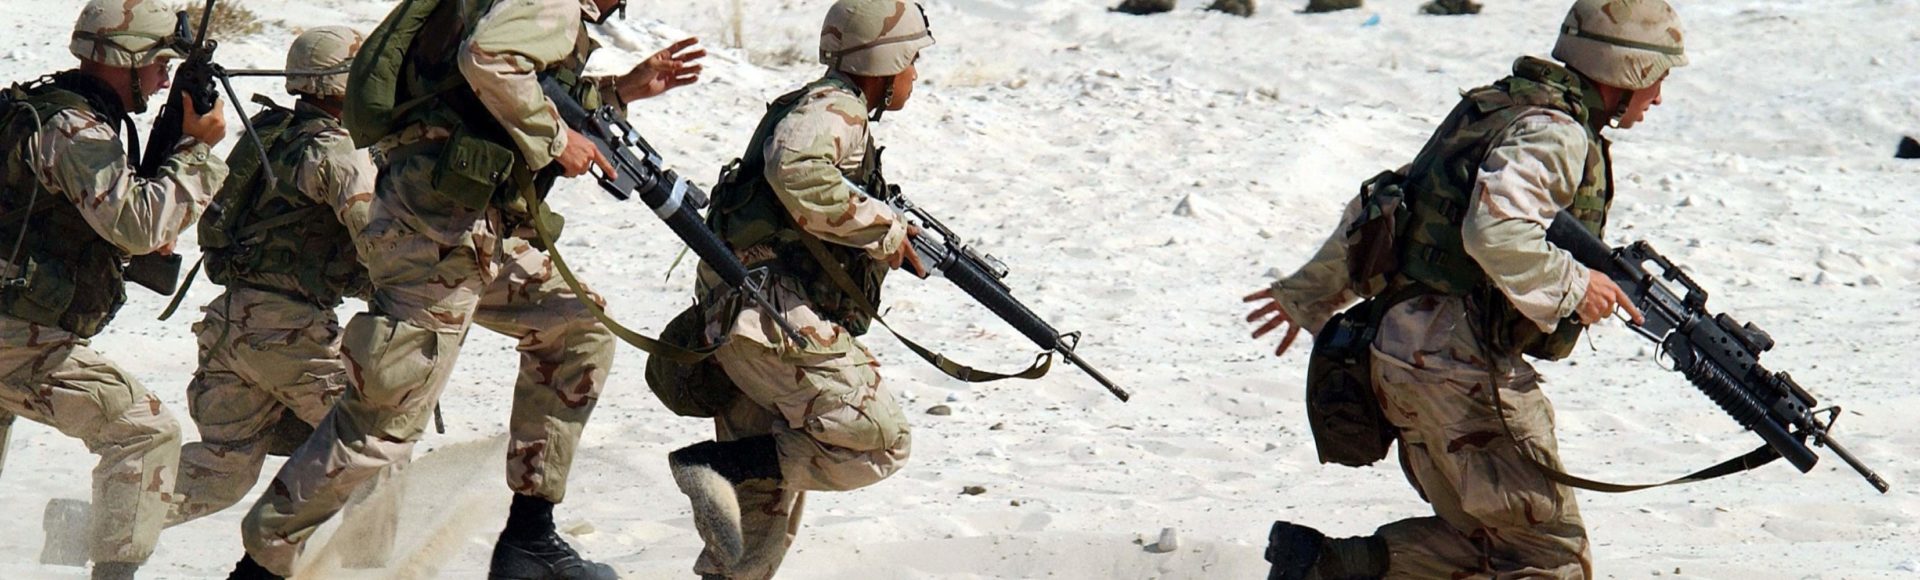 soldiers running with guns in full desert camouflage